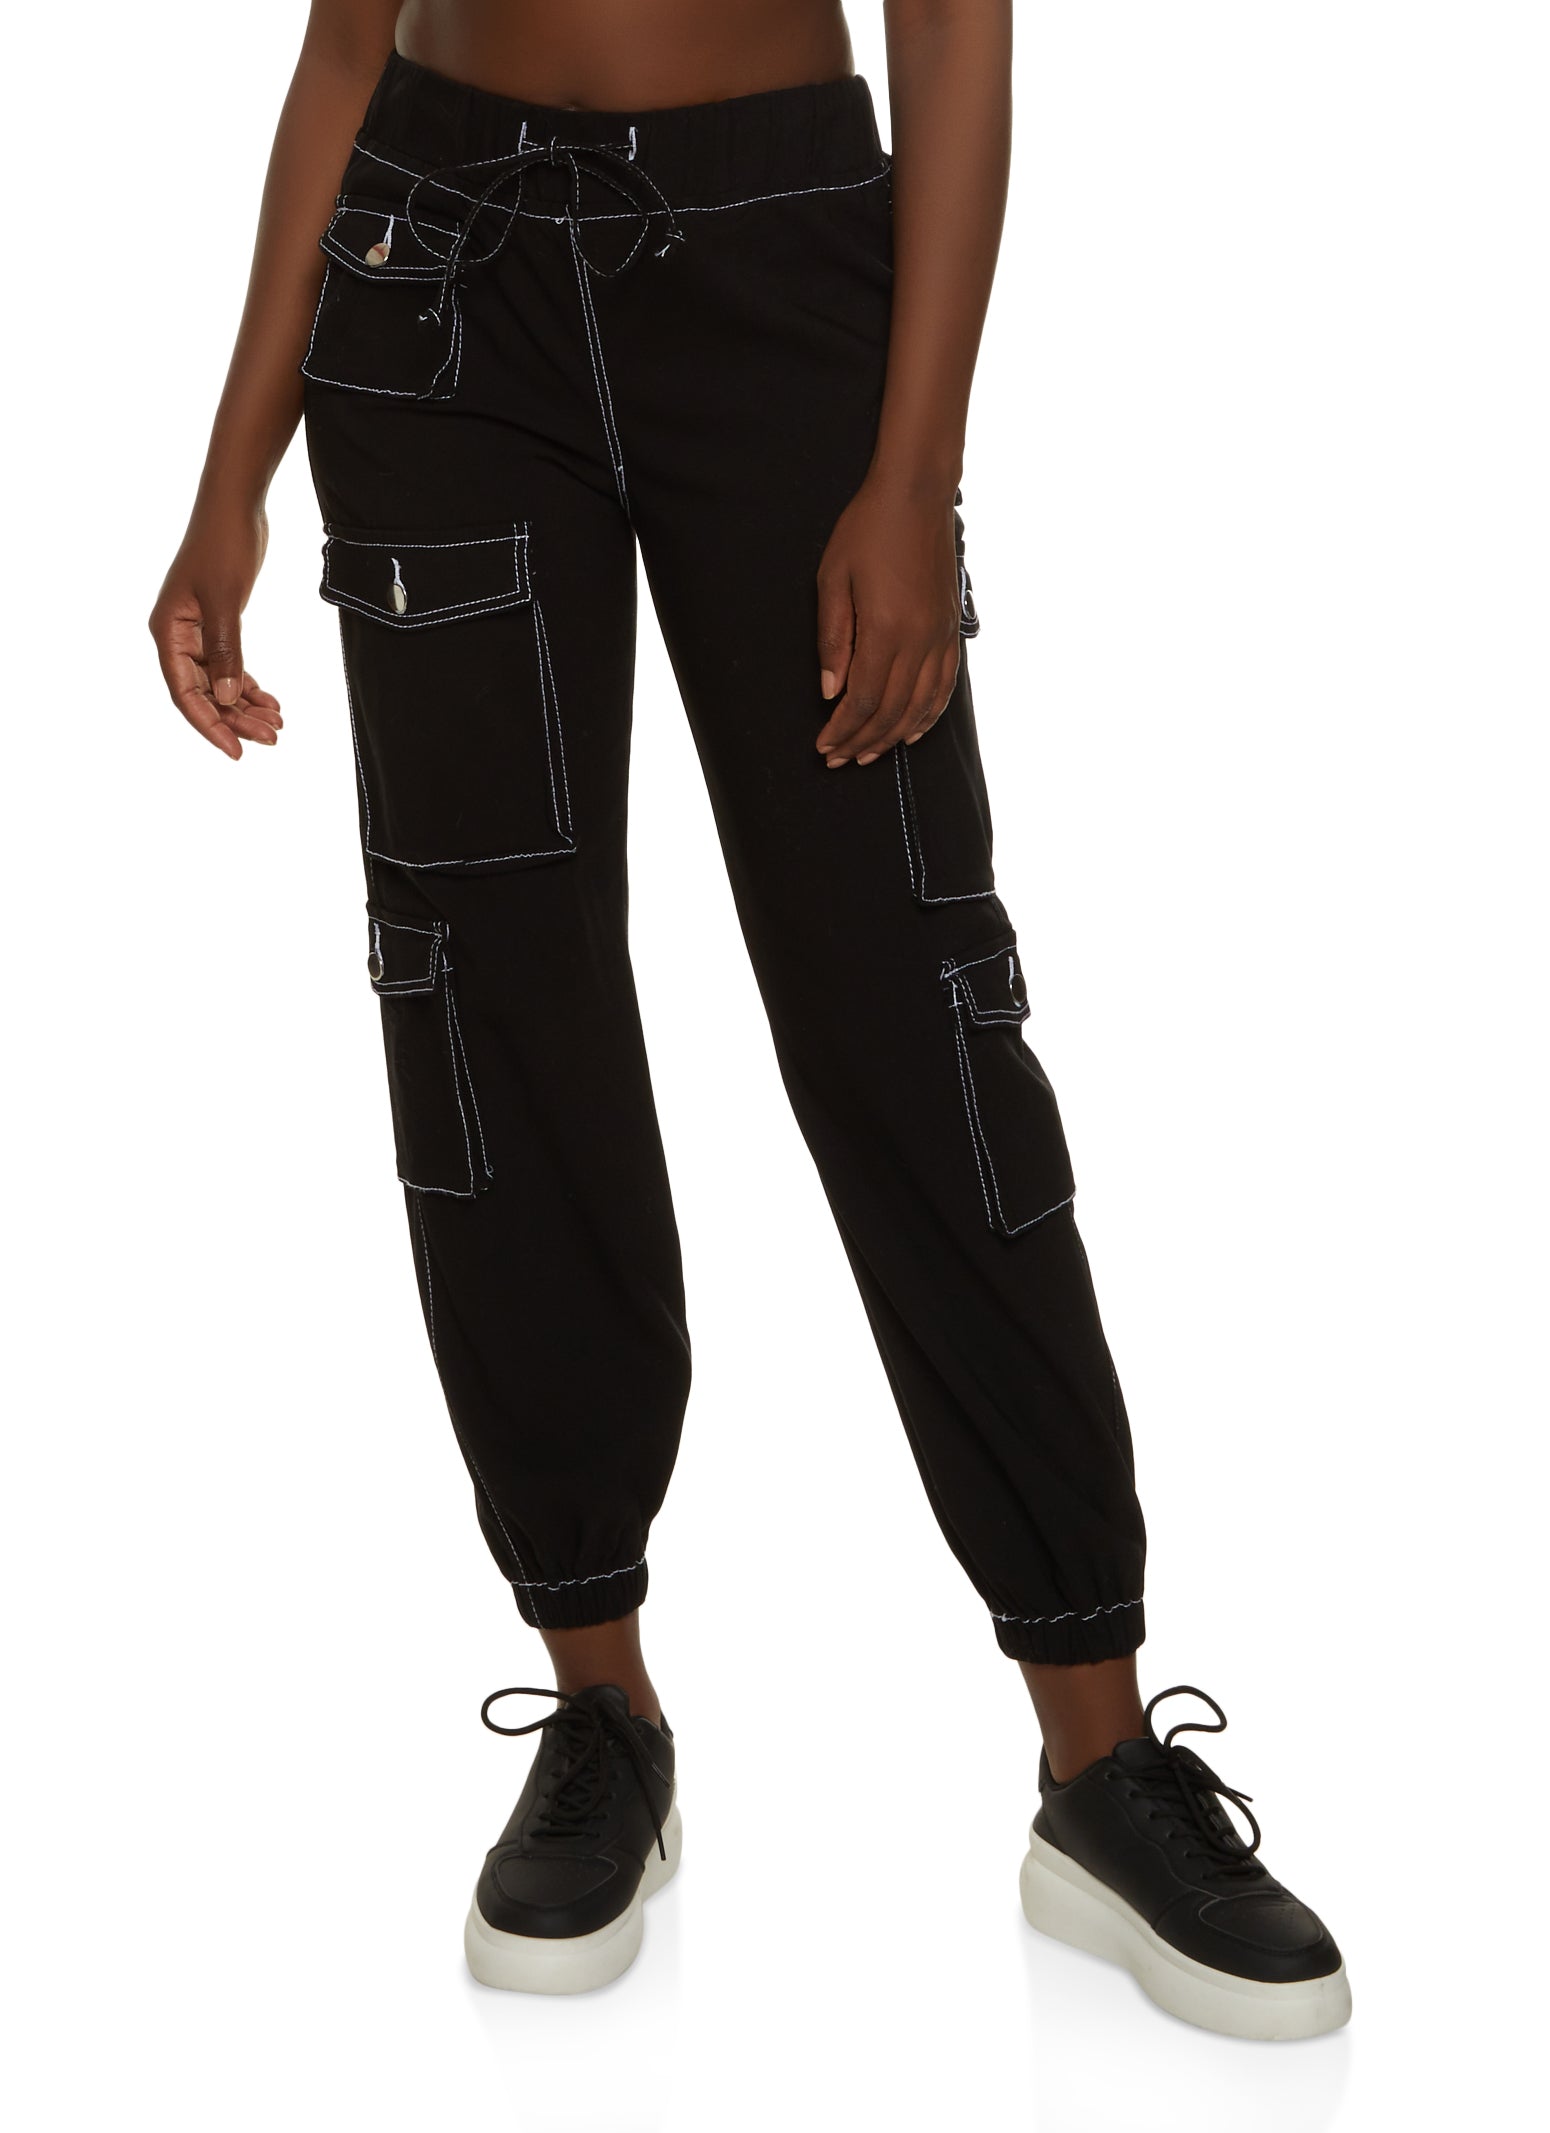 Womens Black Pants, Everyday Low Prices